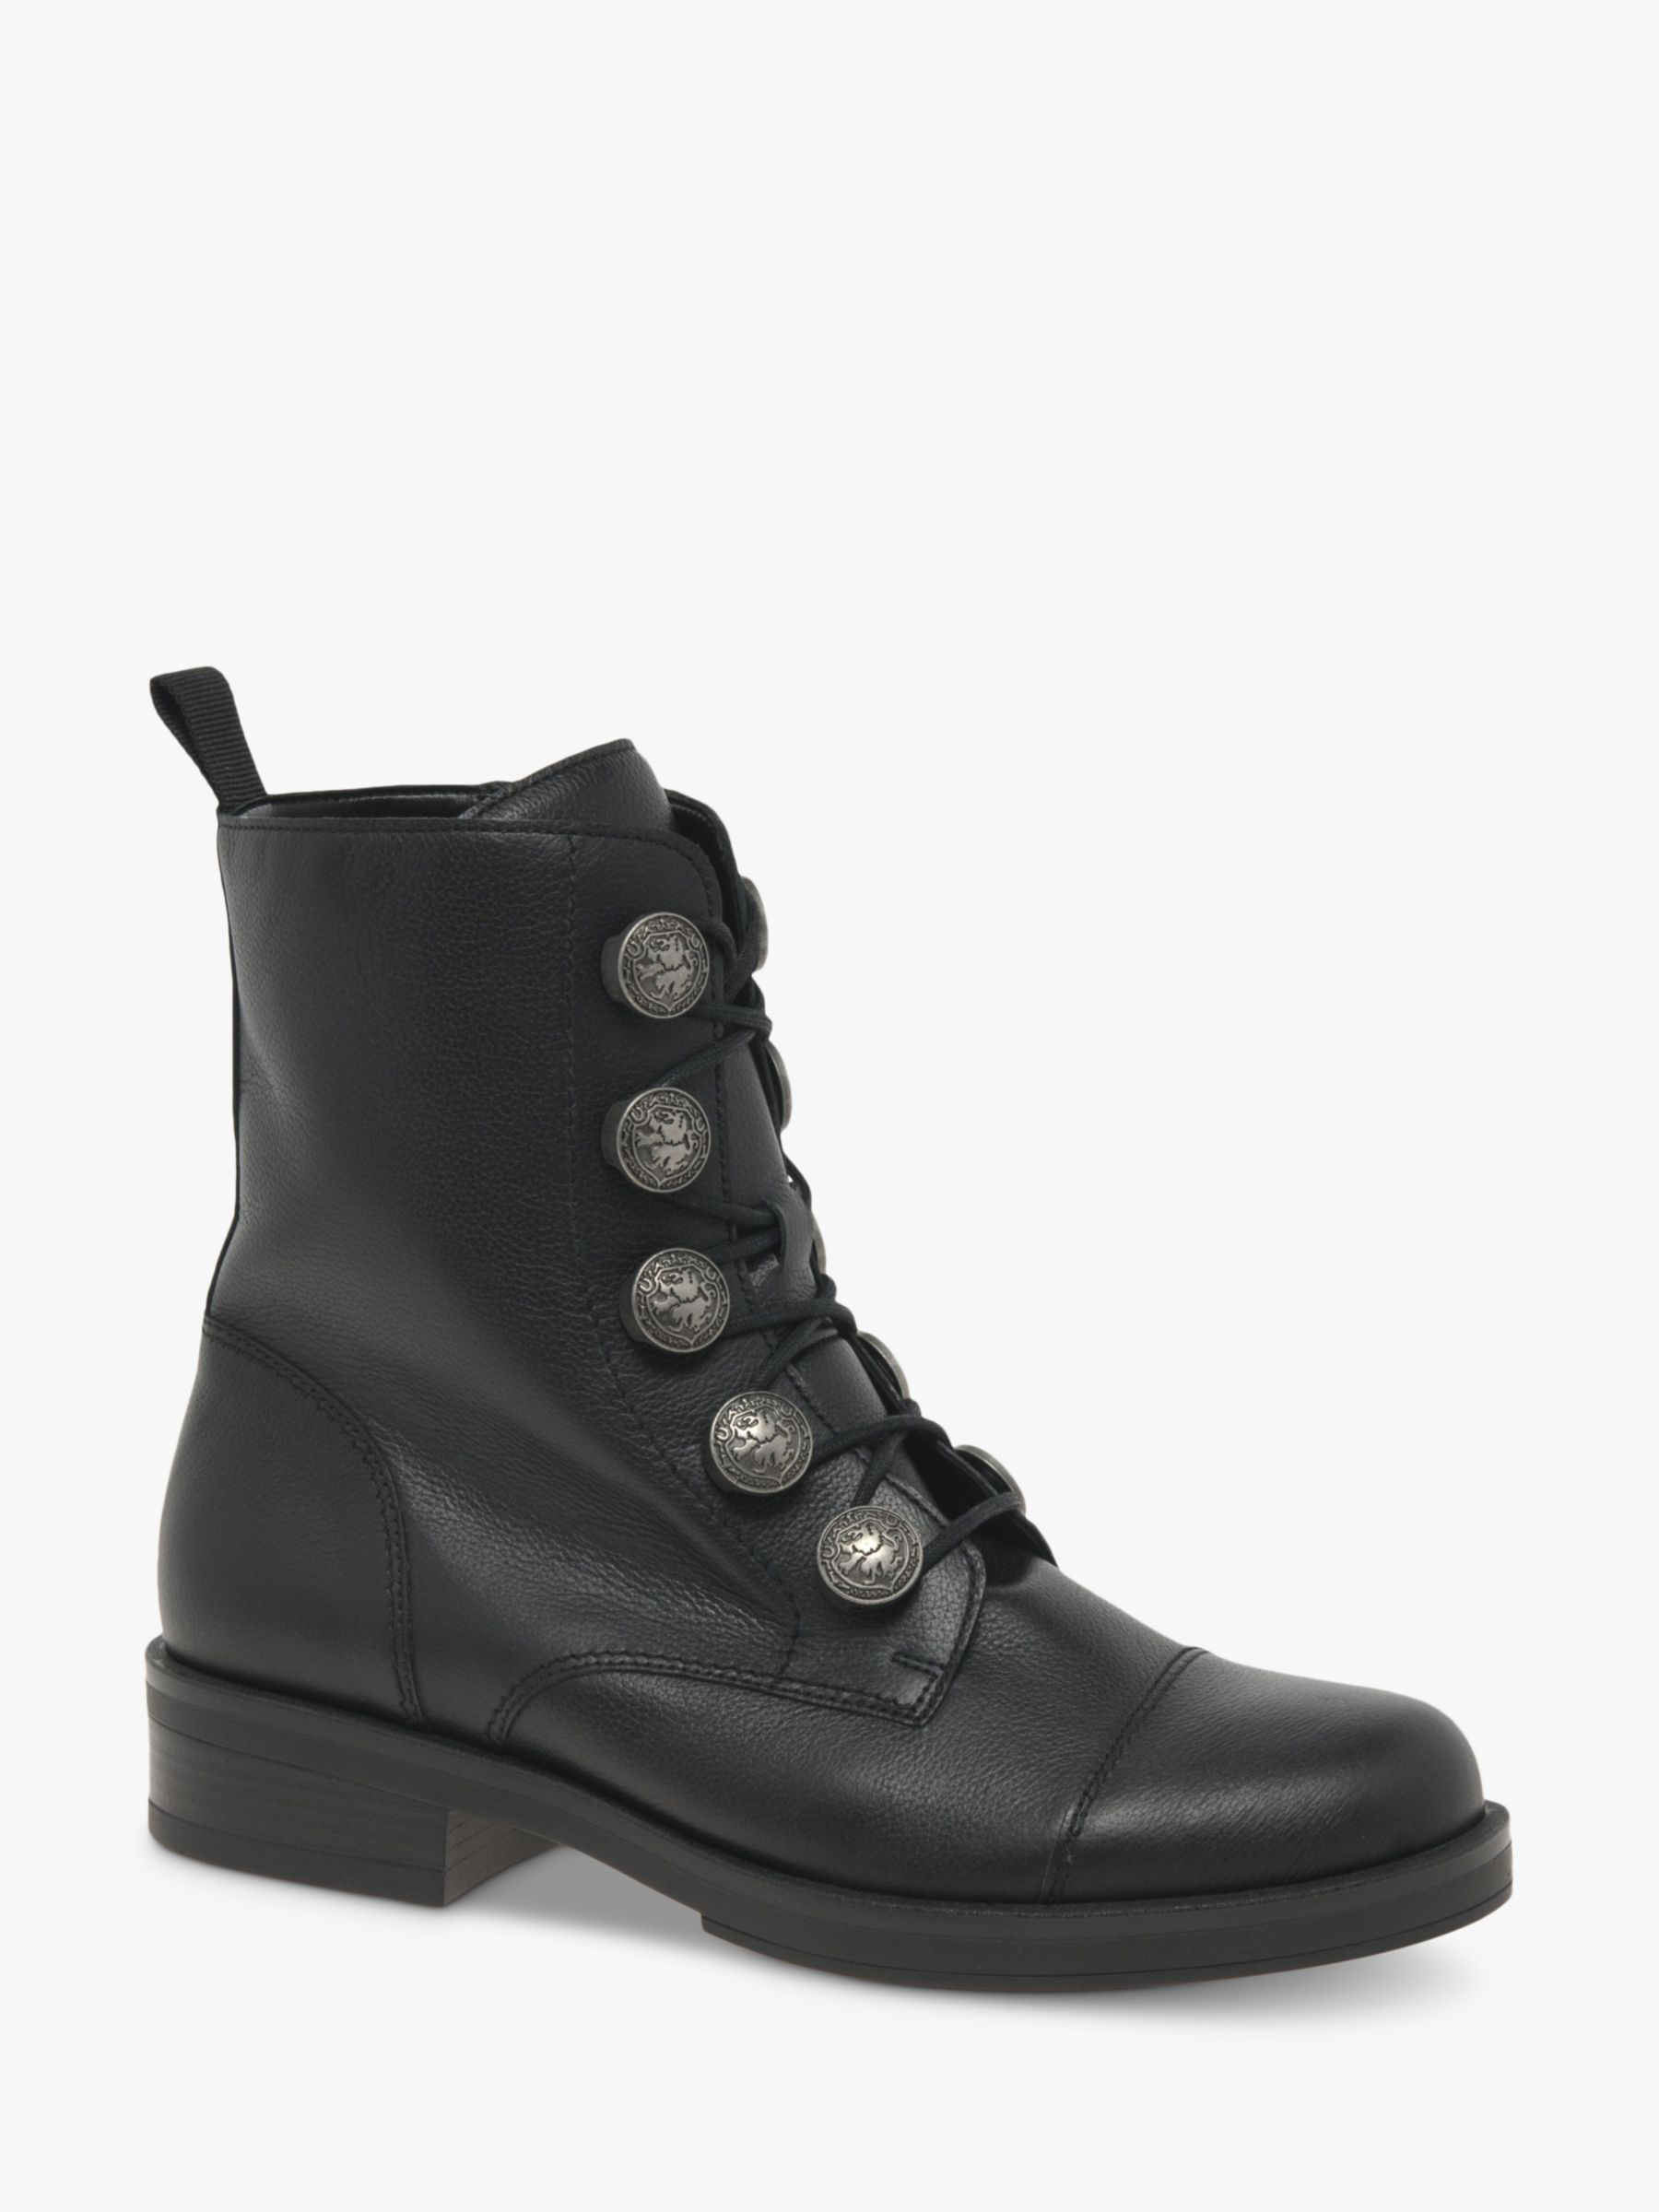 Gabor Lady Leather Military Button Ankle Black at John Lewis & Partners